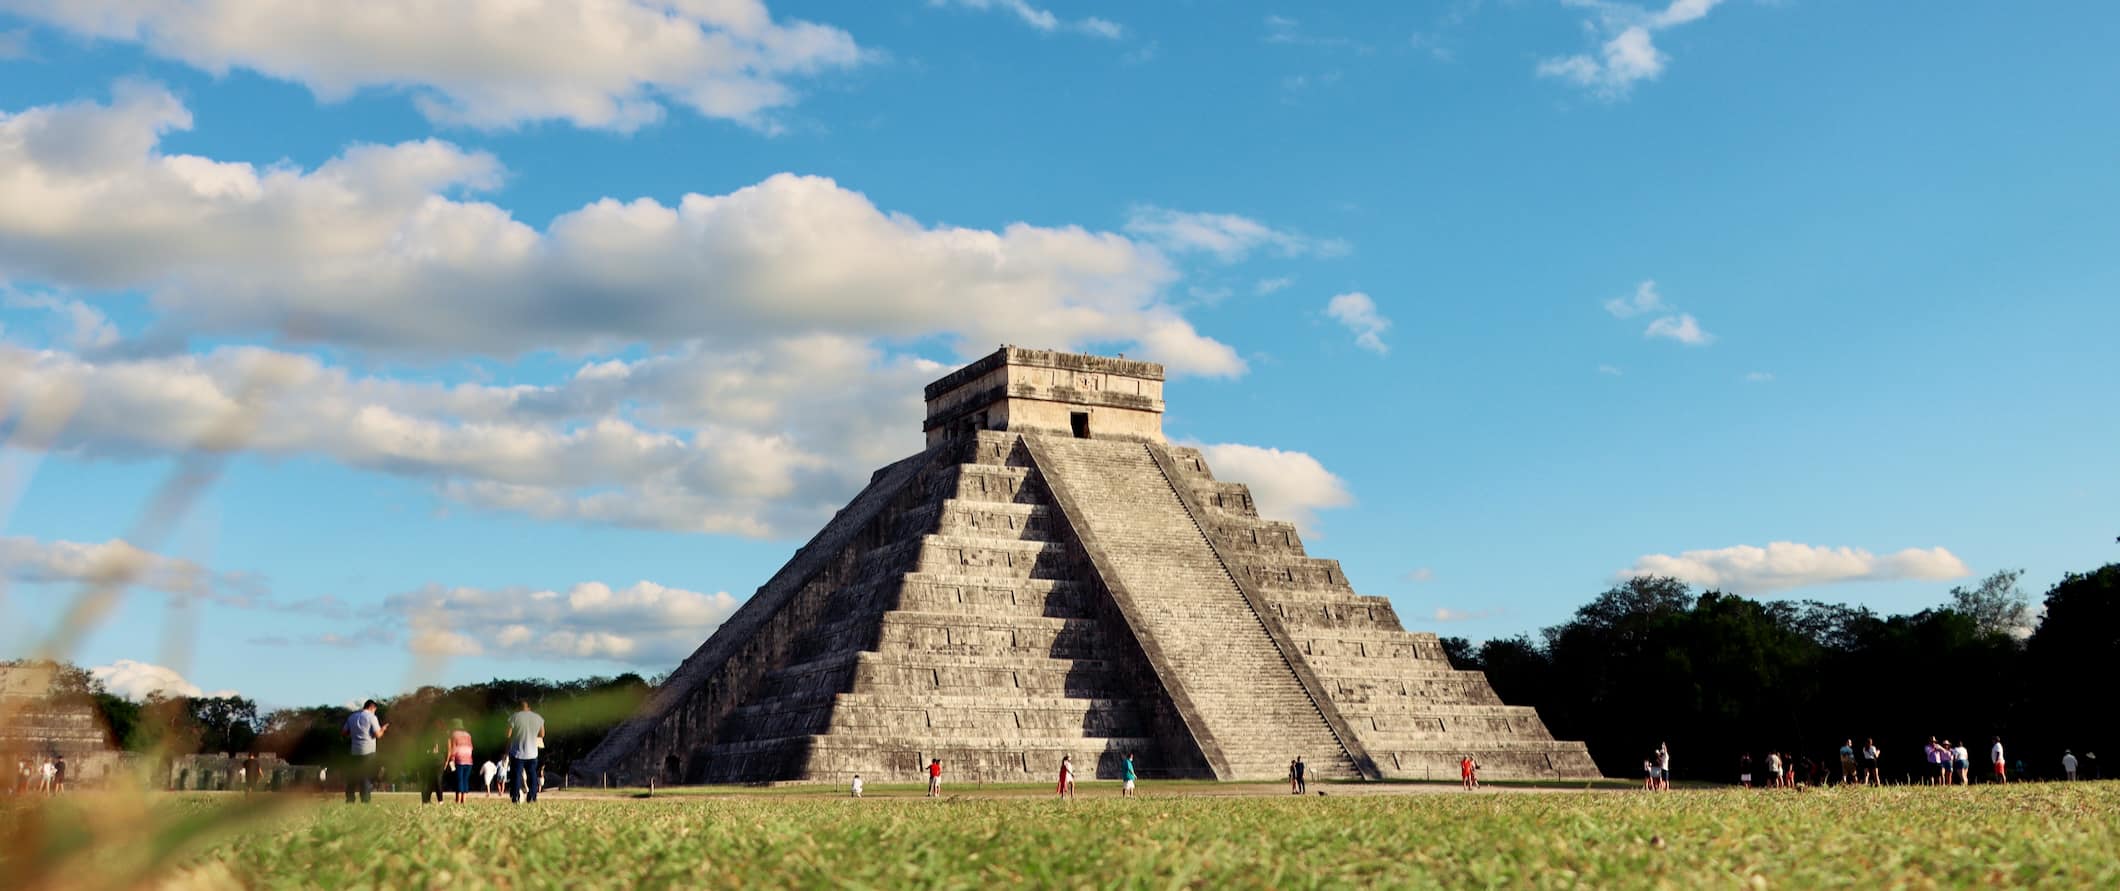 The Wonder of the World Chichen Itza towering over a field near Cancun, Mexico